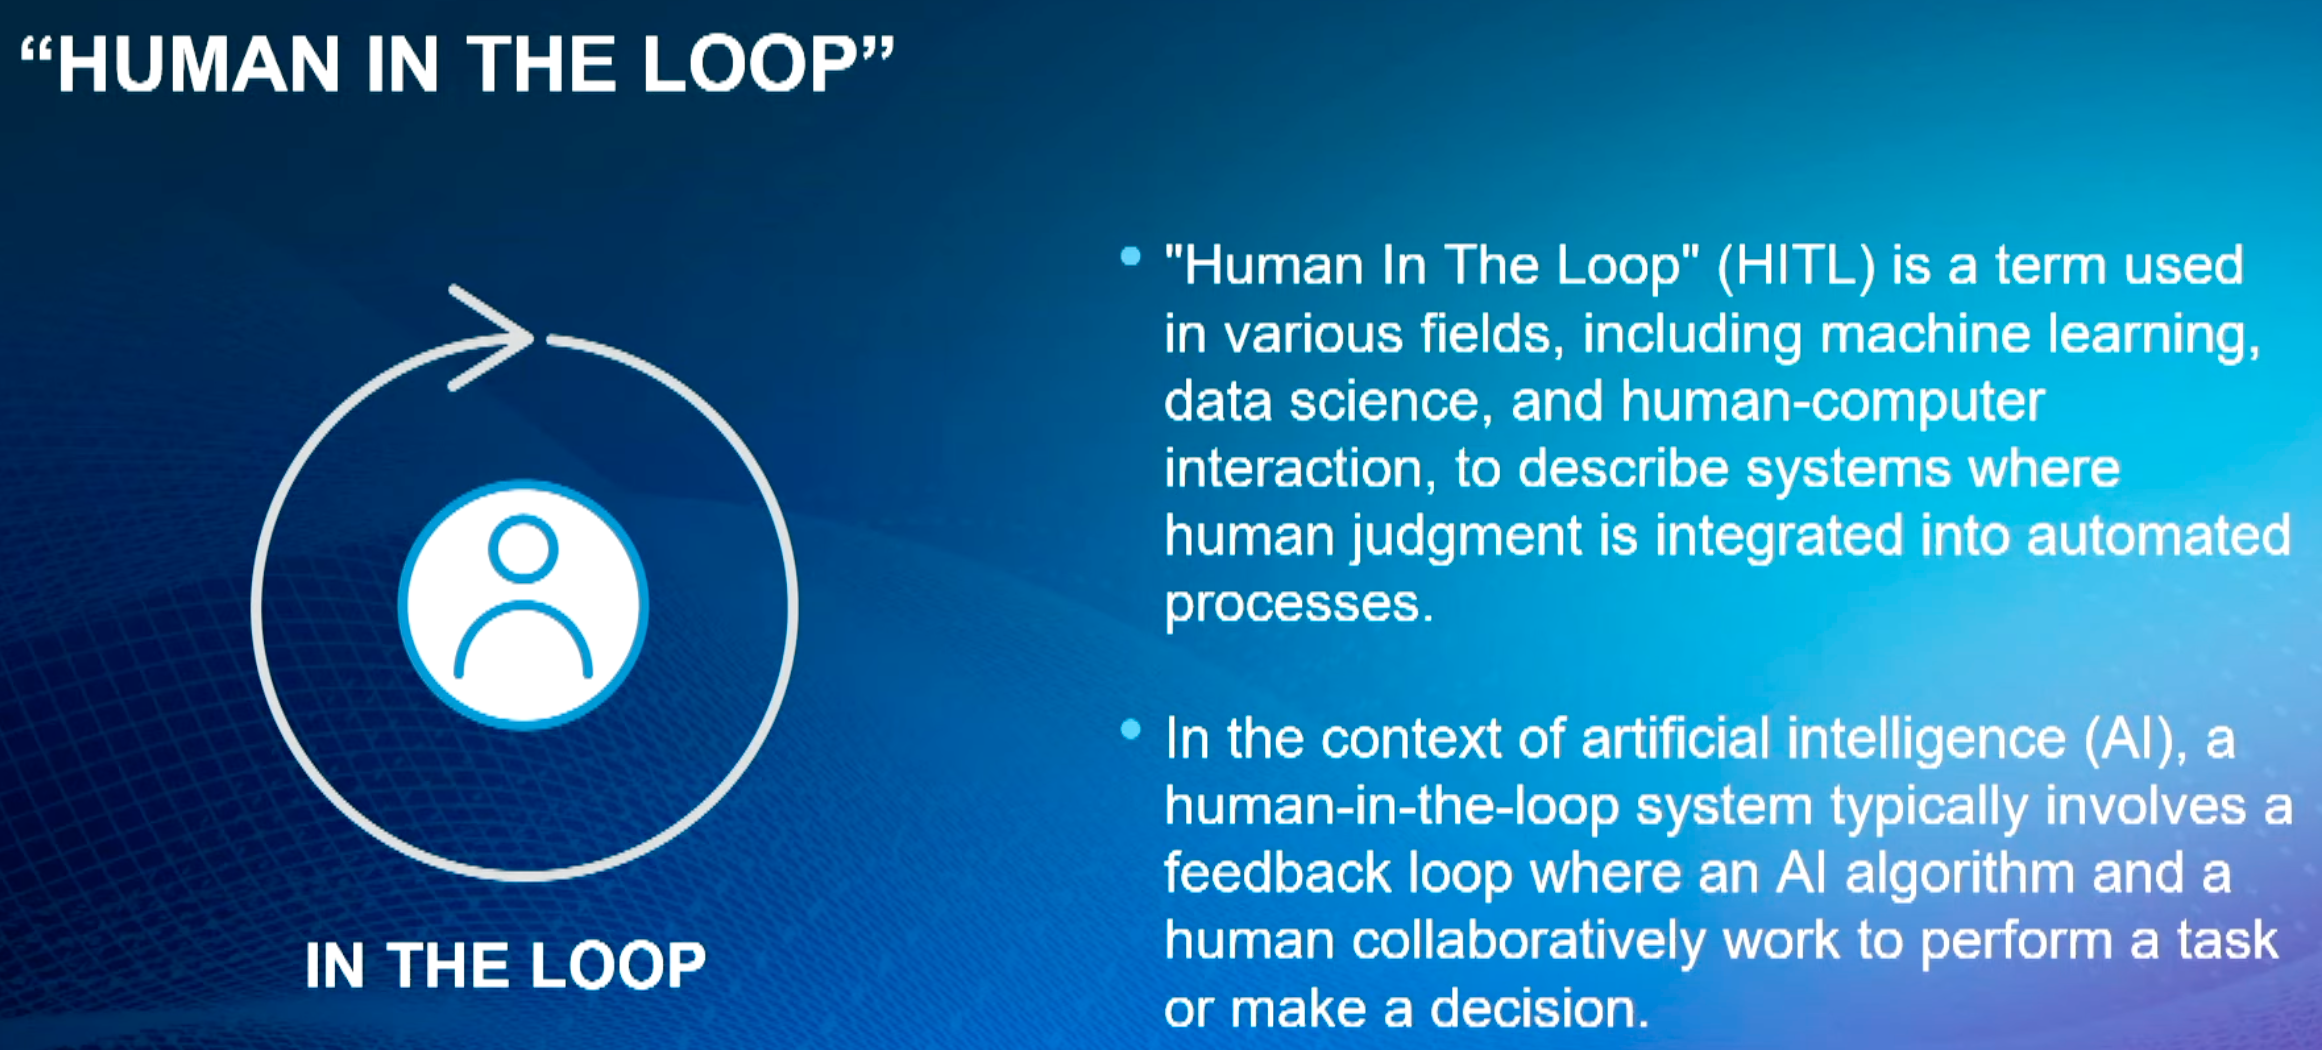 Image illustrating "humans in the loop," a feedback system where humans and AI work together 